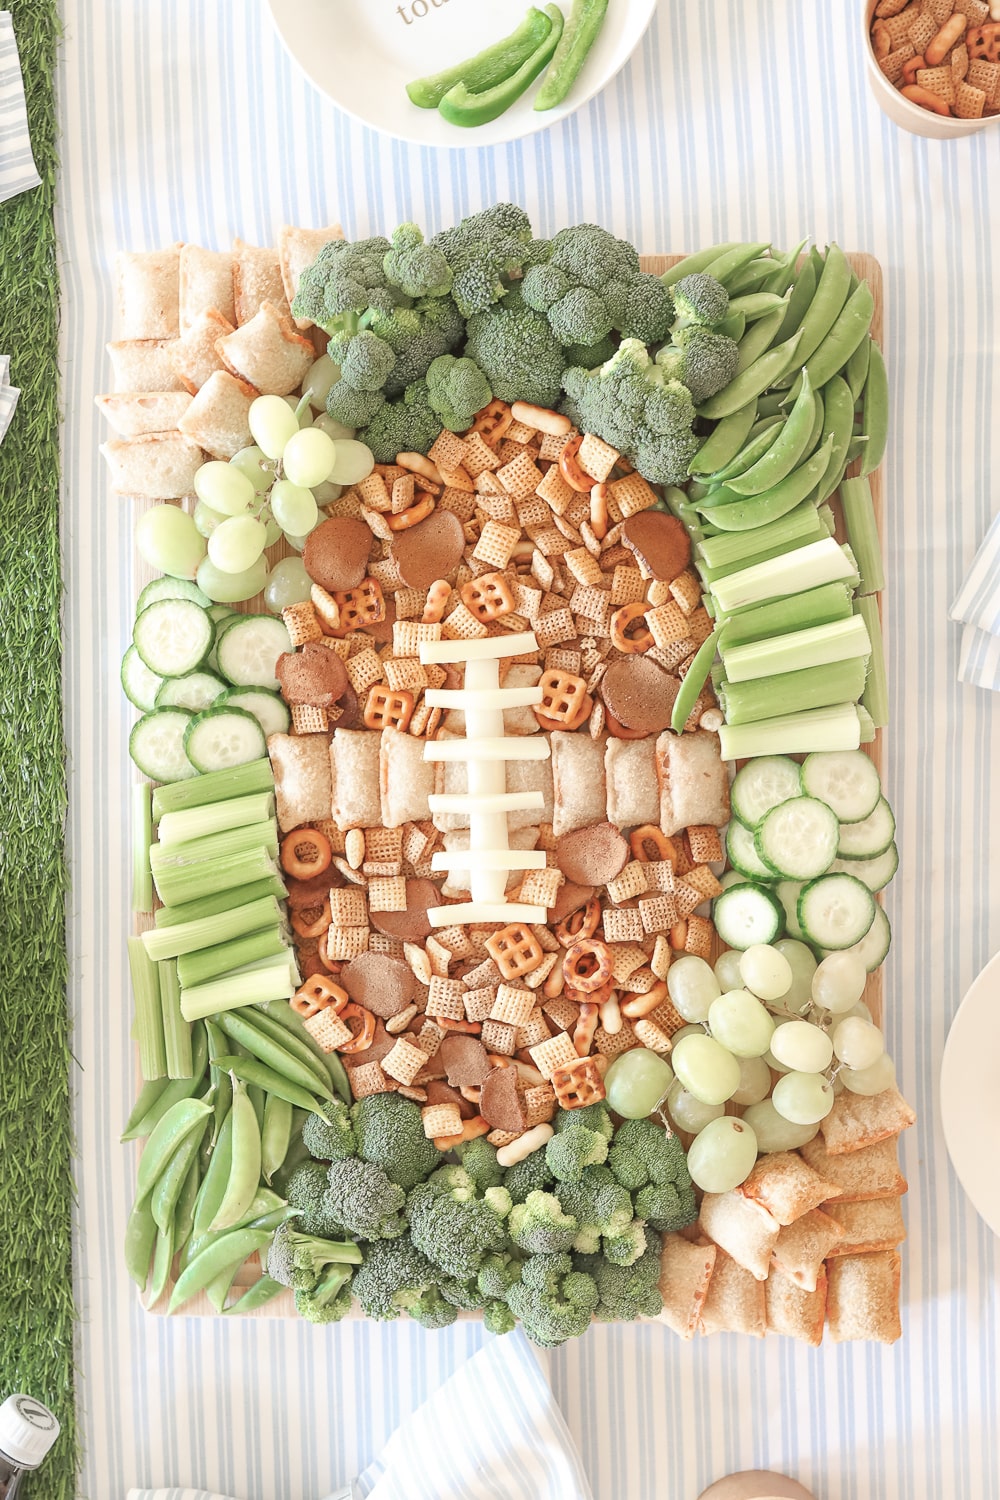 Superbowl party platter created by blogger Stephanie Ziajka on Diary of a Debutante